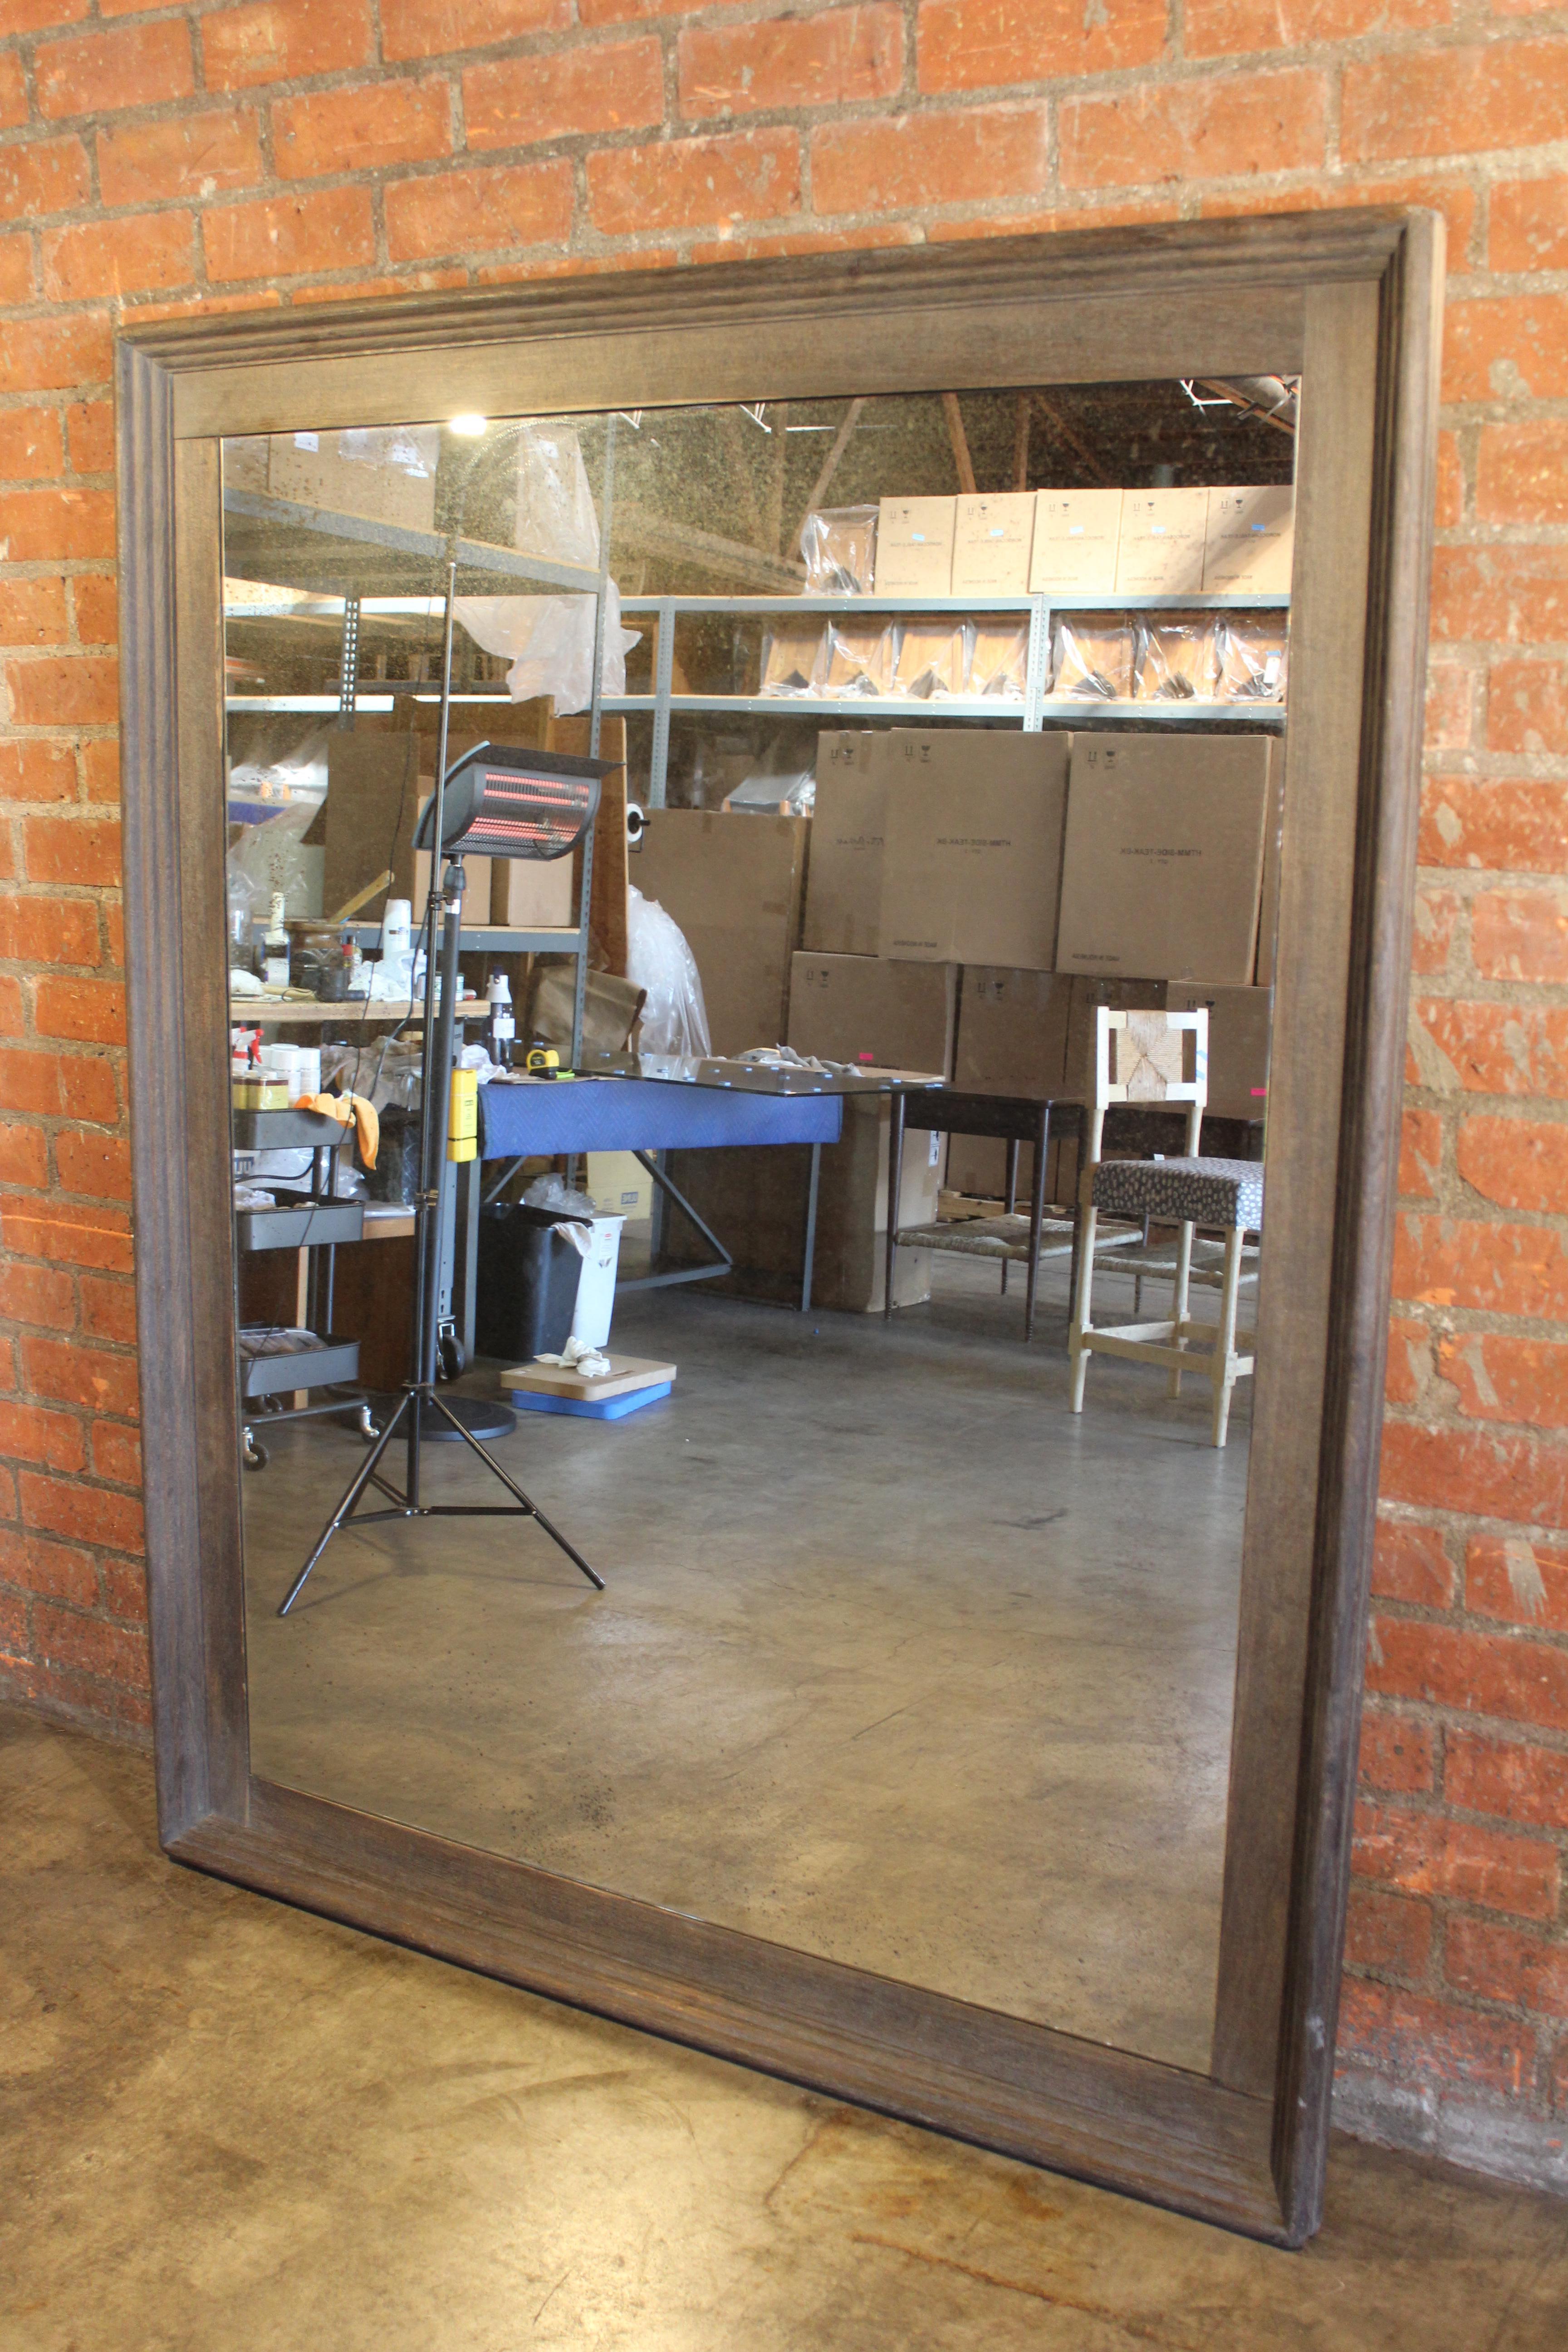 An impressive antique 19th century oak framed mirror in original finish. New antique mirror. Can be used as a leaning floor mirror or hung up on a wall.
Wonderful condition with age appropriate patina to the wood frame.